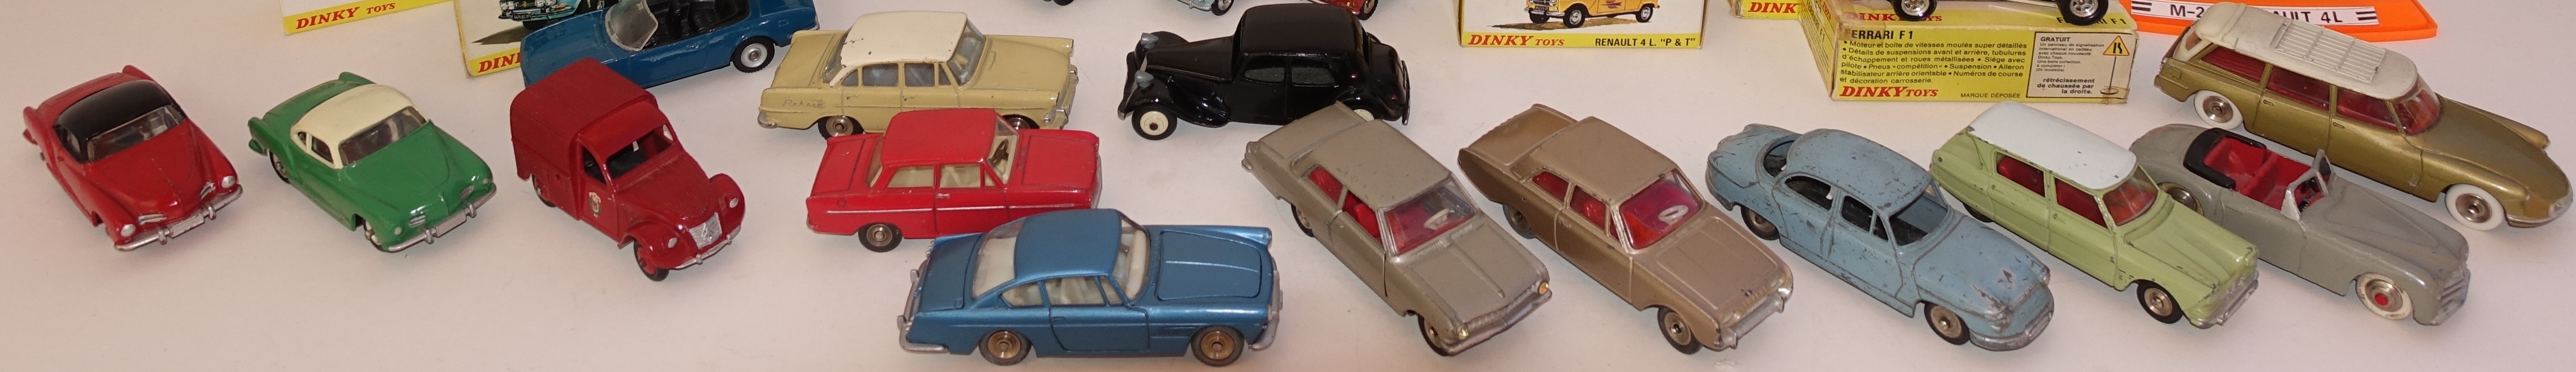 2 Dinky Toys France unboxed